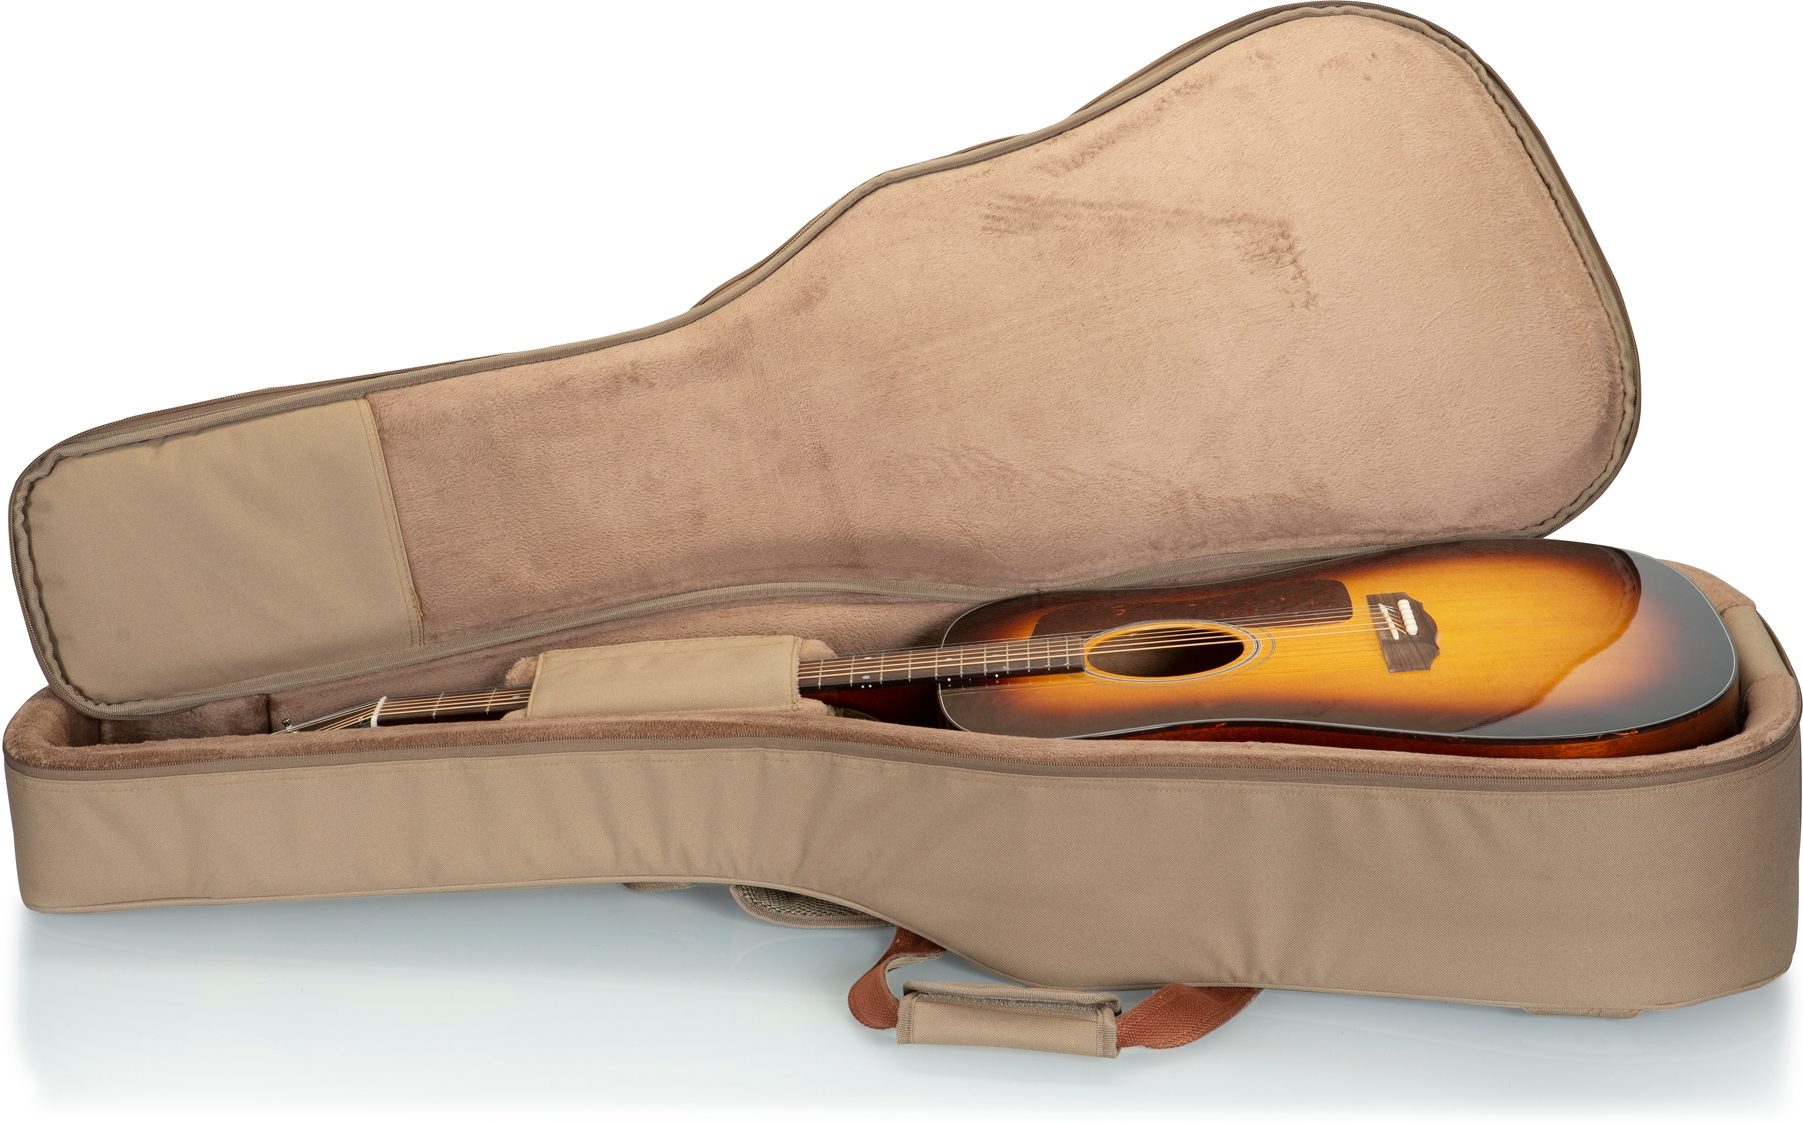 Levy's 200 Series Deluxe Dreadnought Bag